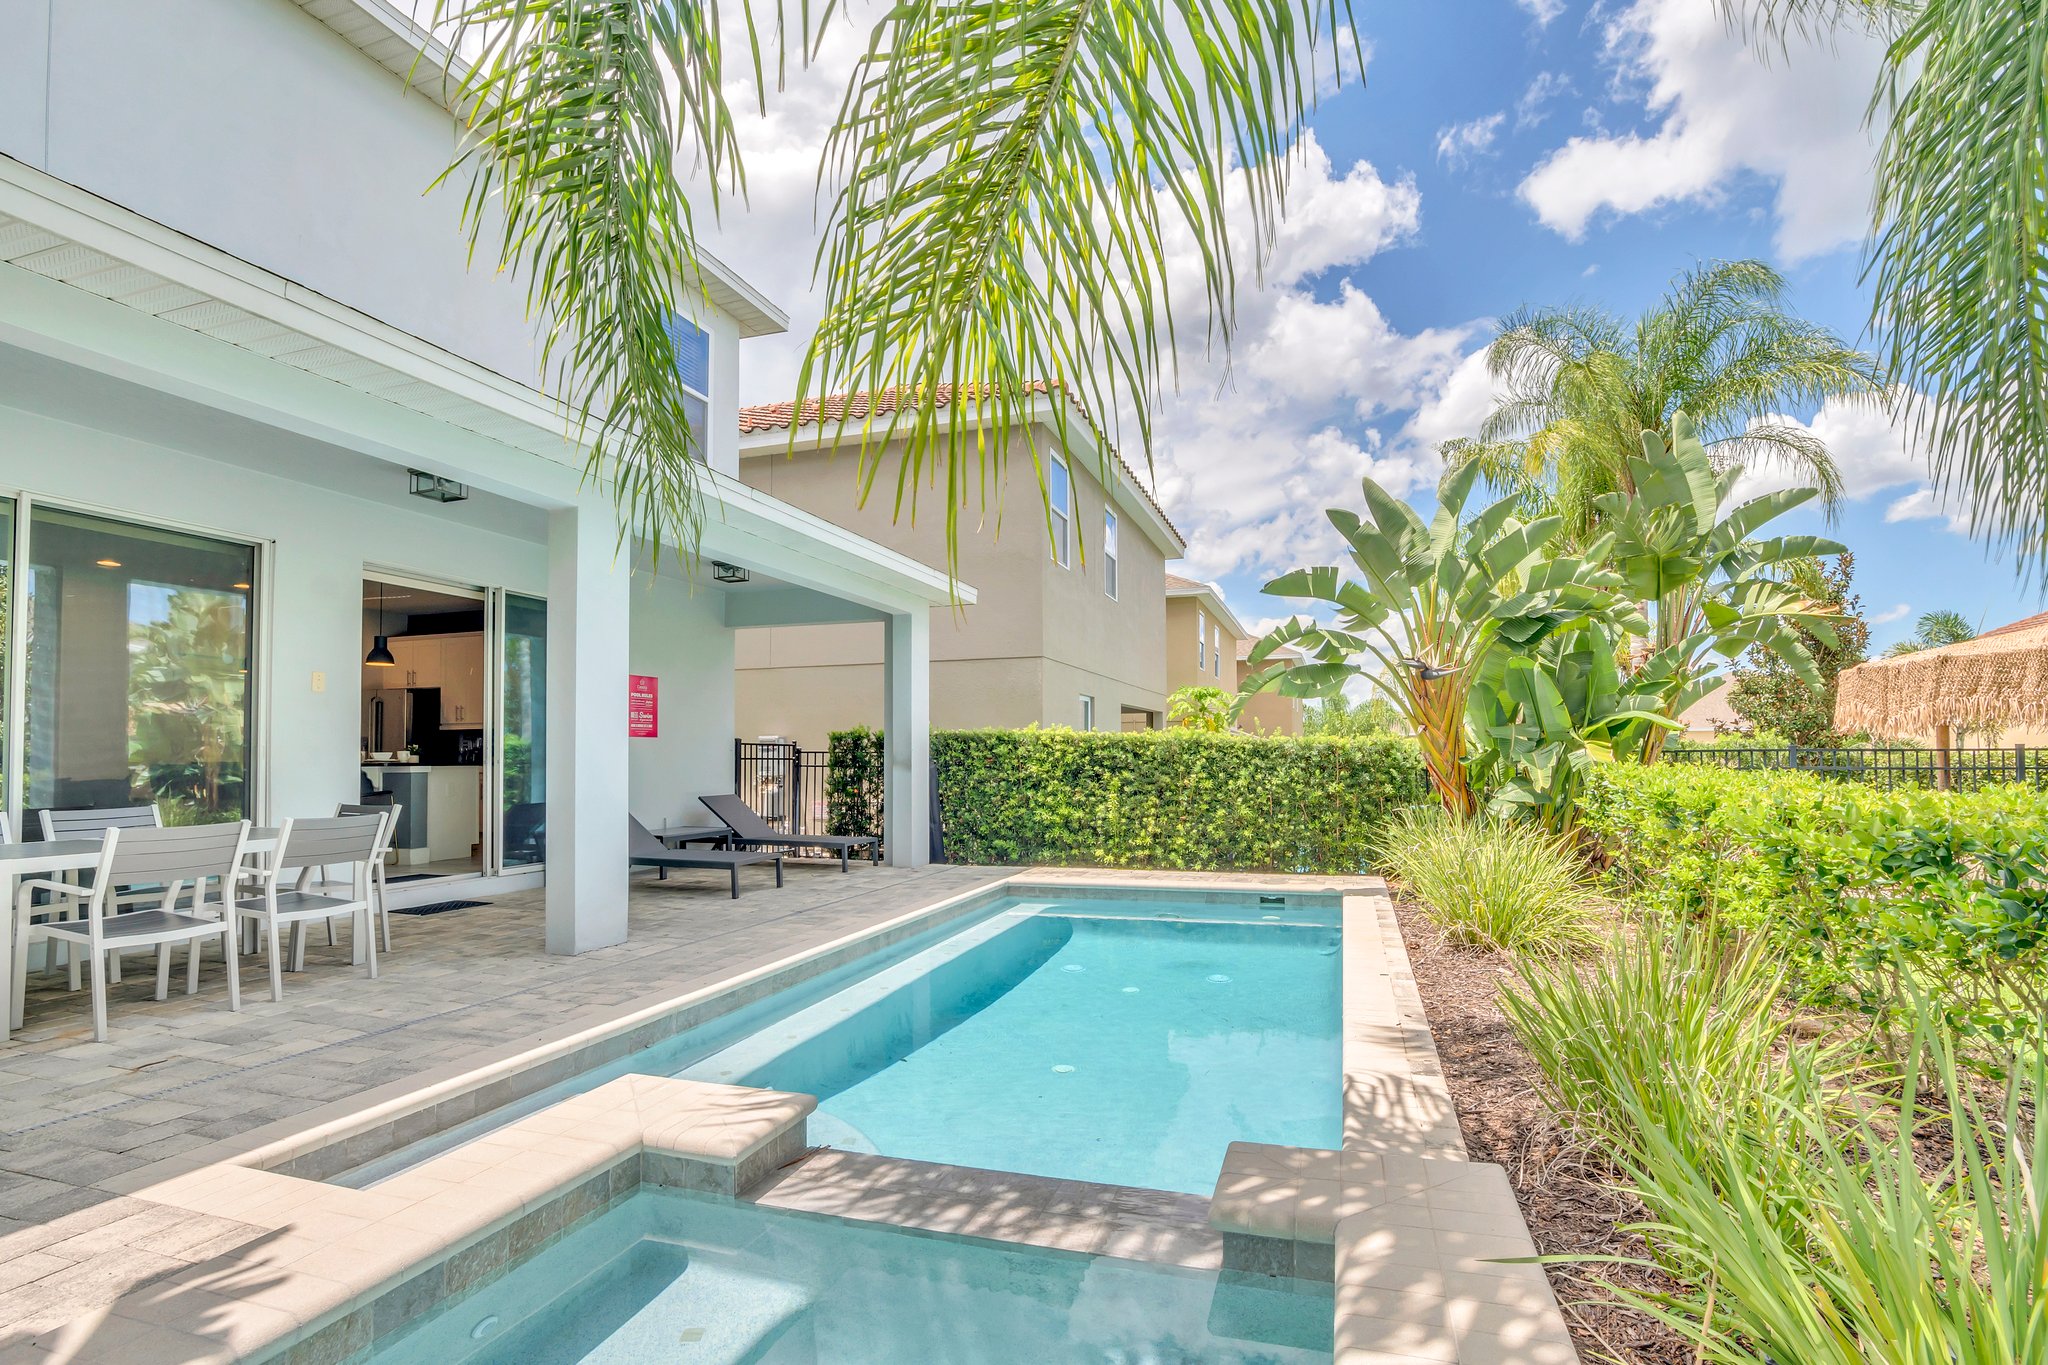 Stunning Pool Area of the Apartment in Kissimmee Florida - Tranquility by the sparkling water - Immerse yourself in the cool elegance - Discover bliss by the pool in serene setting - Palm trees and tropical plants enhance the vacation feel